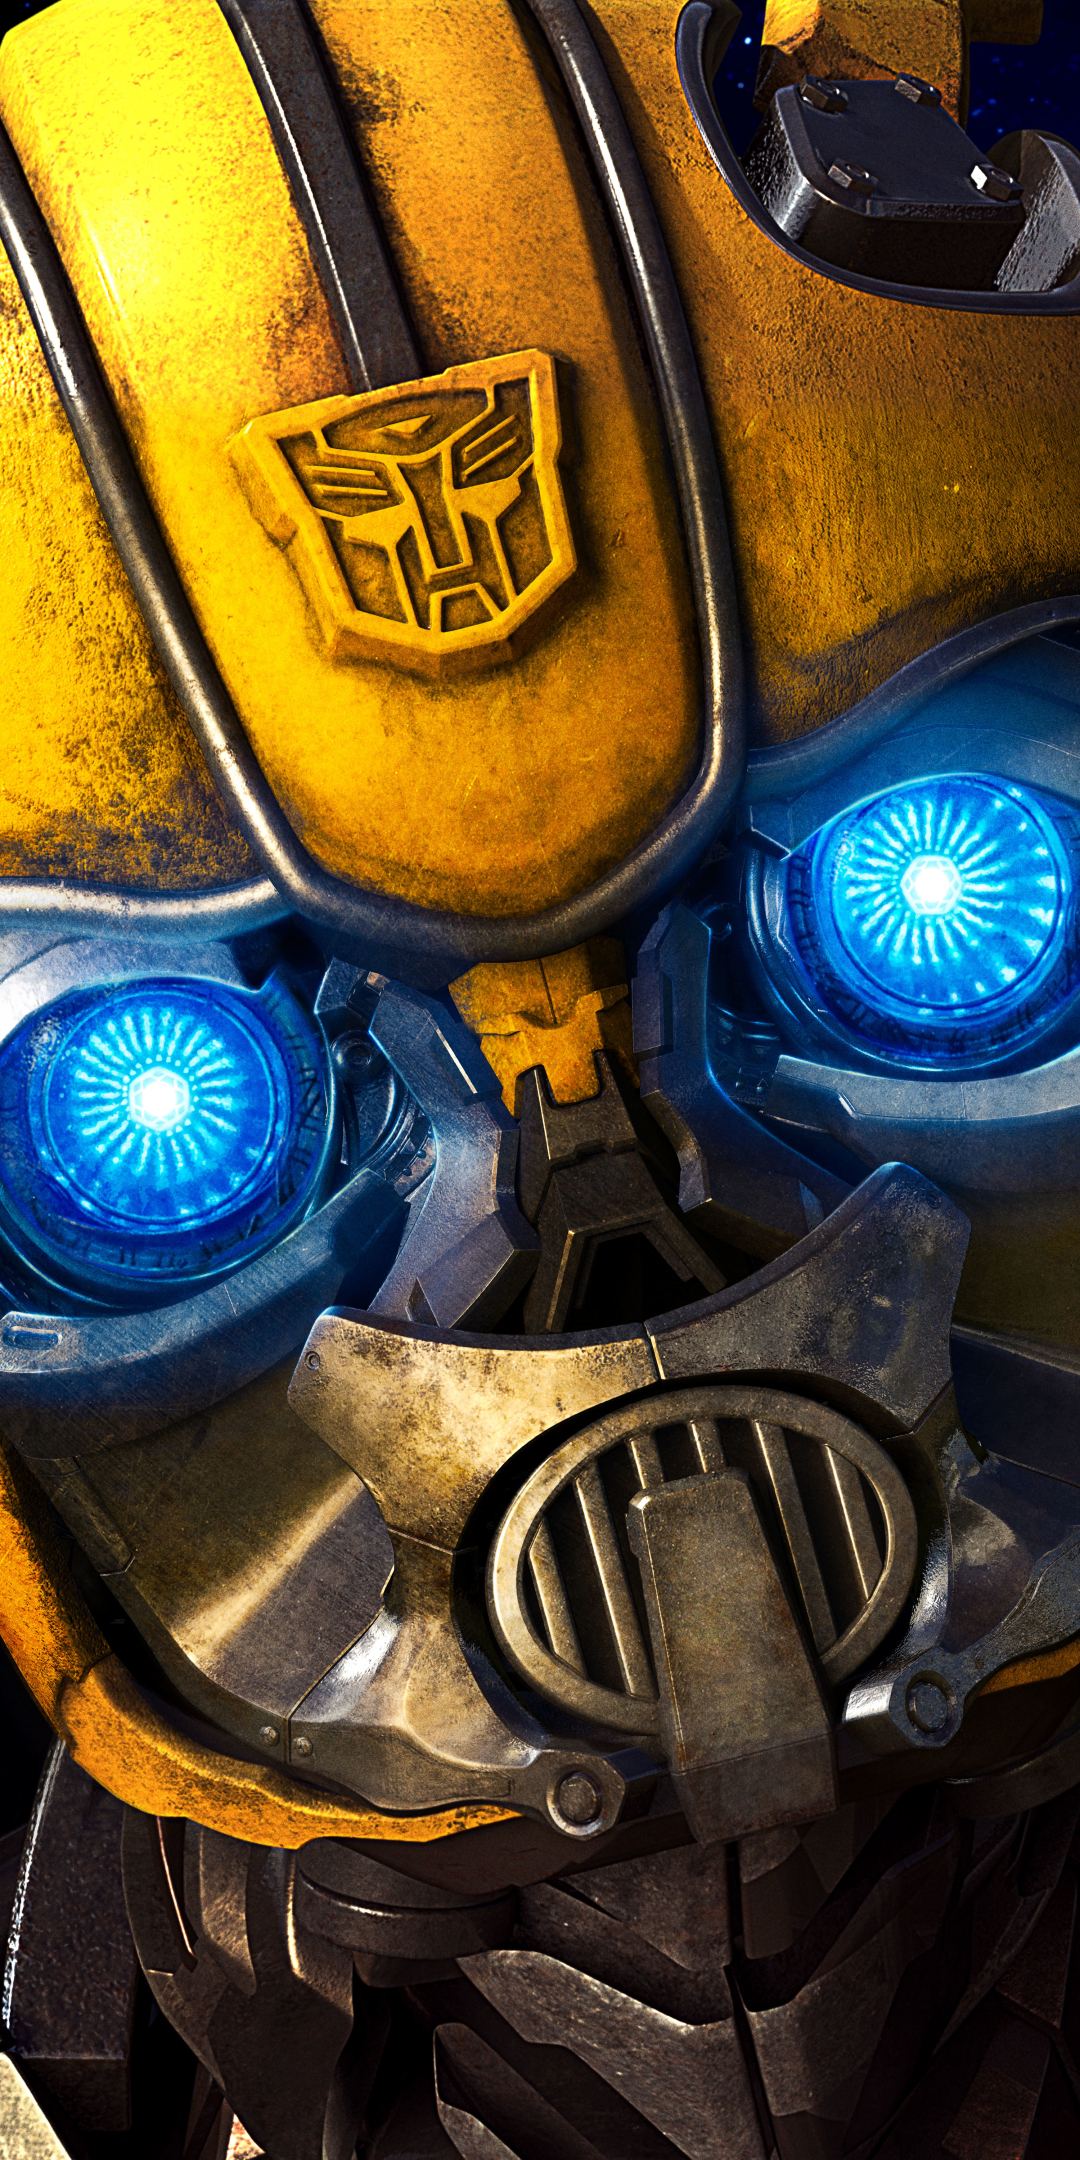 bumblebee (transformers), bumblebee, movie wallpaper for mobile